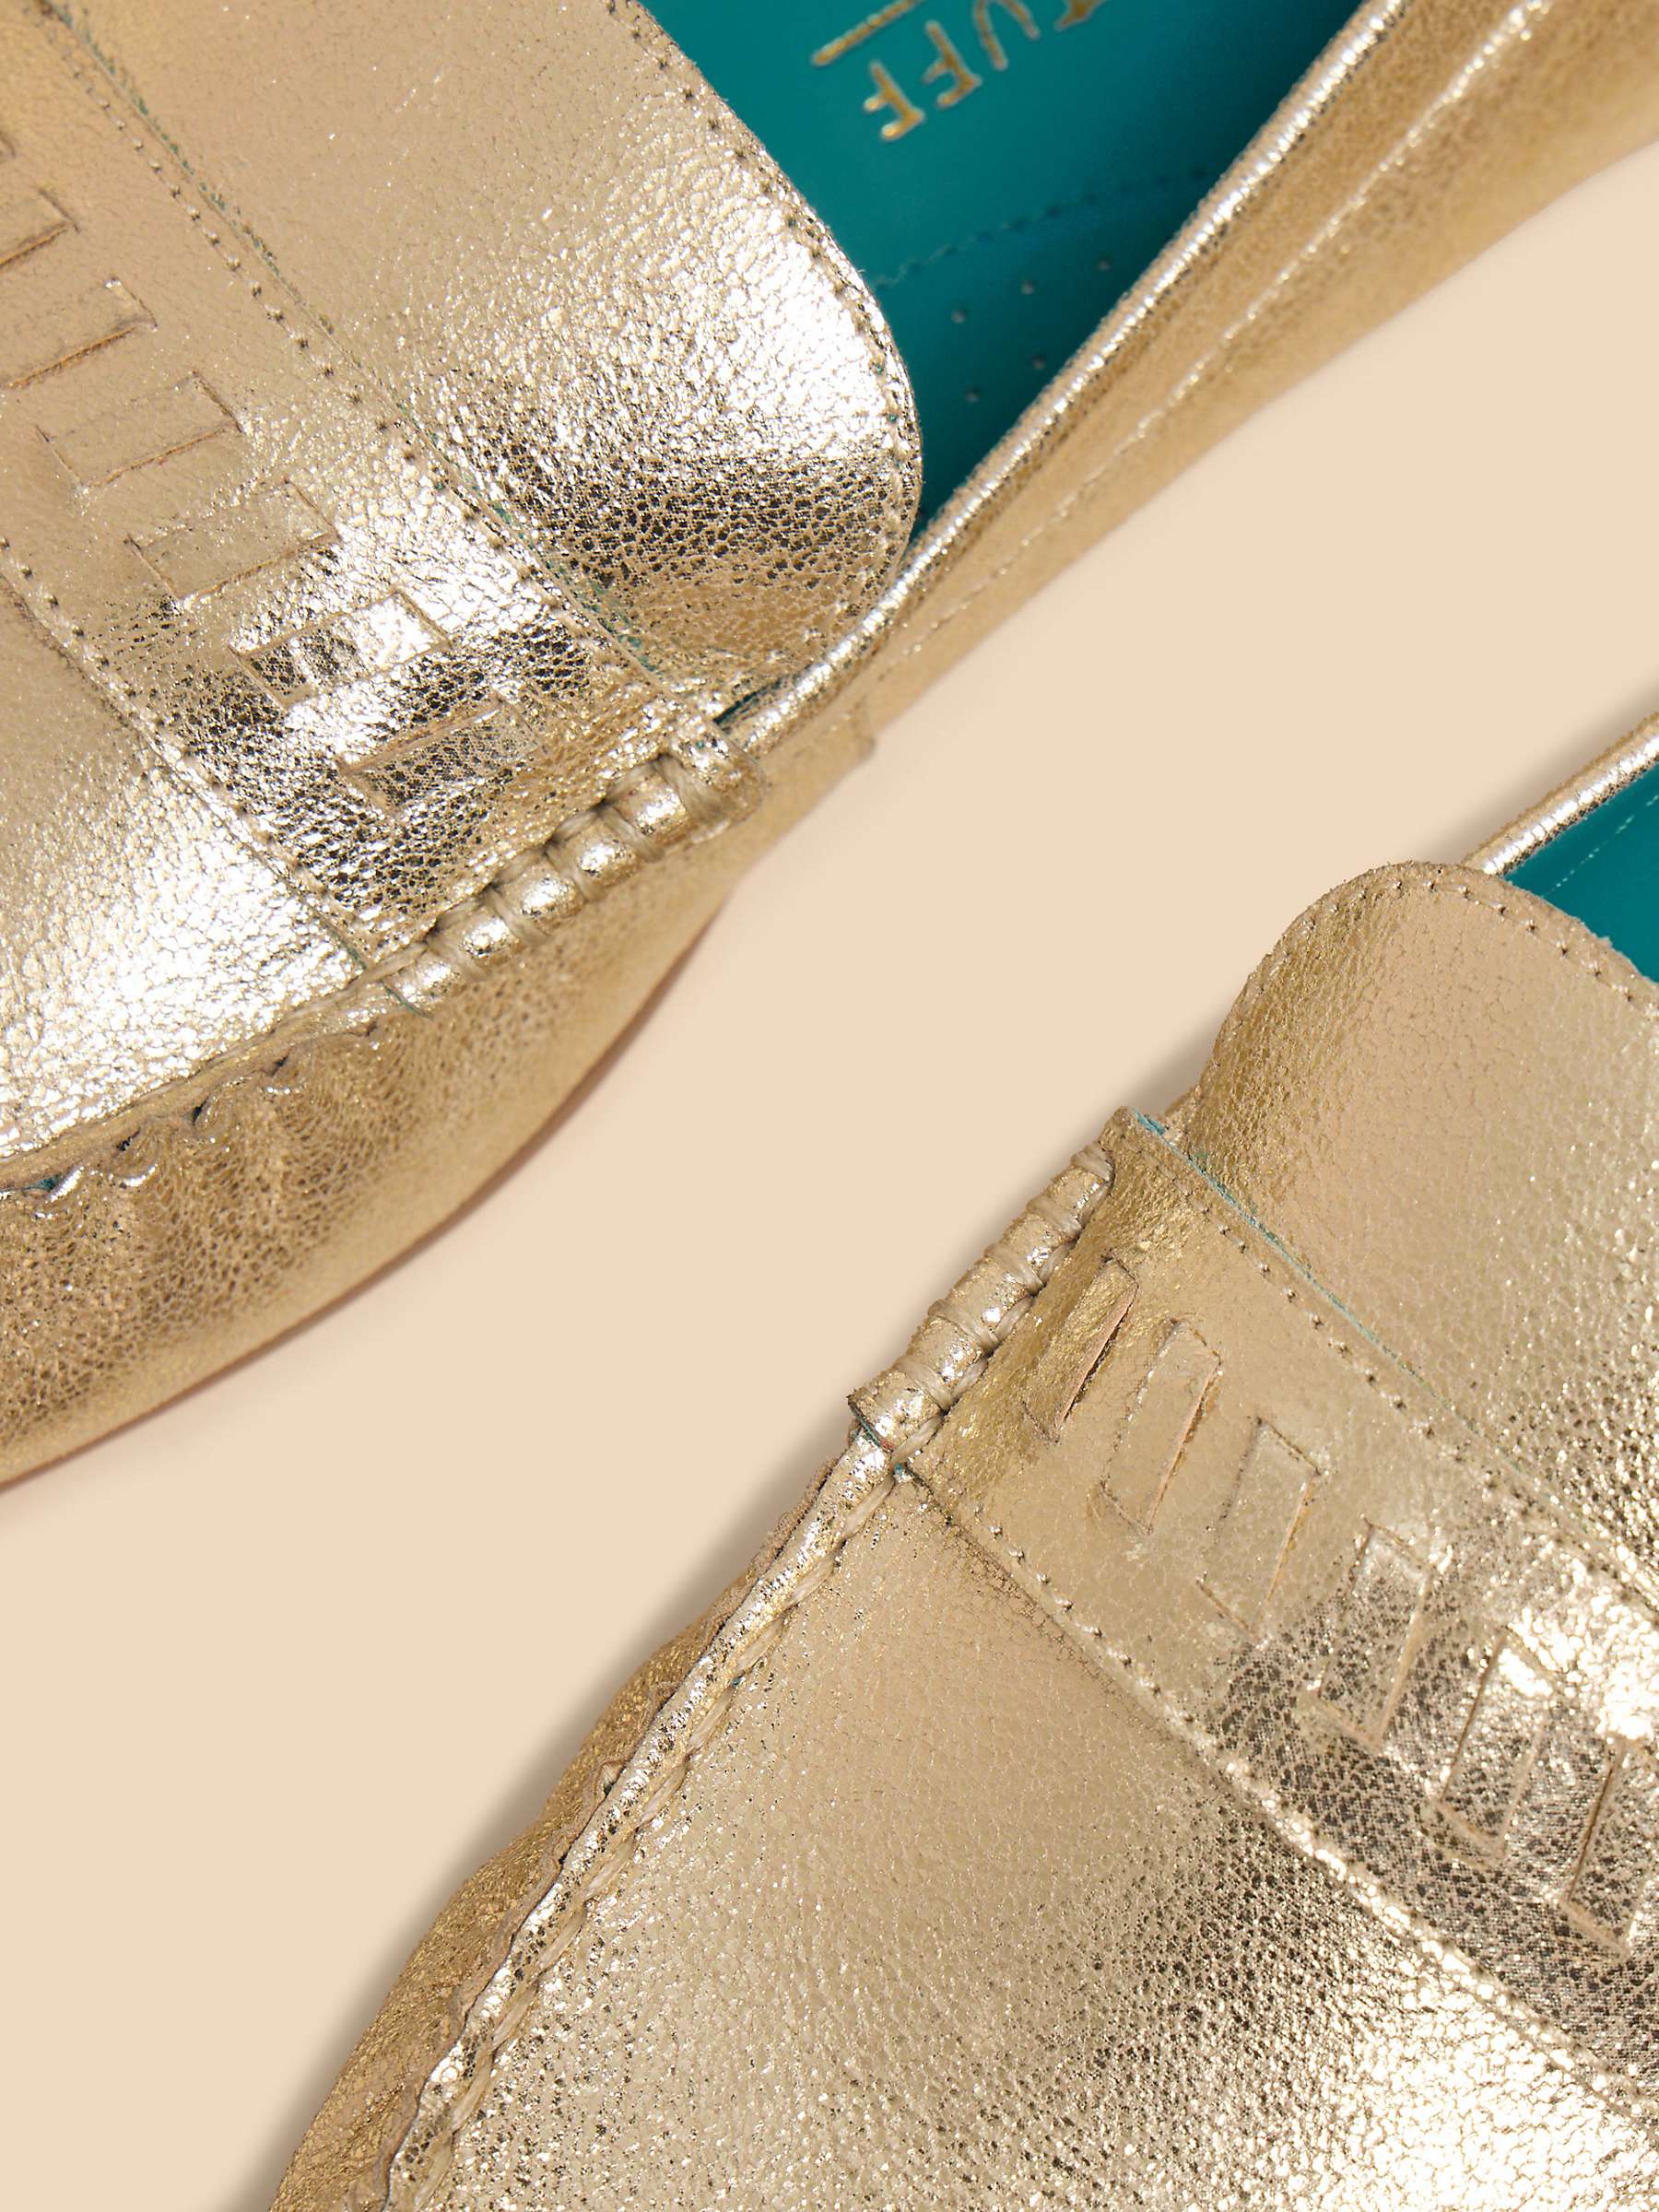 Buy White Stuff Mayflower Leather Moccasins, Gold Online at johnlewis.com